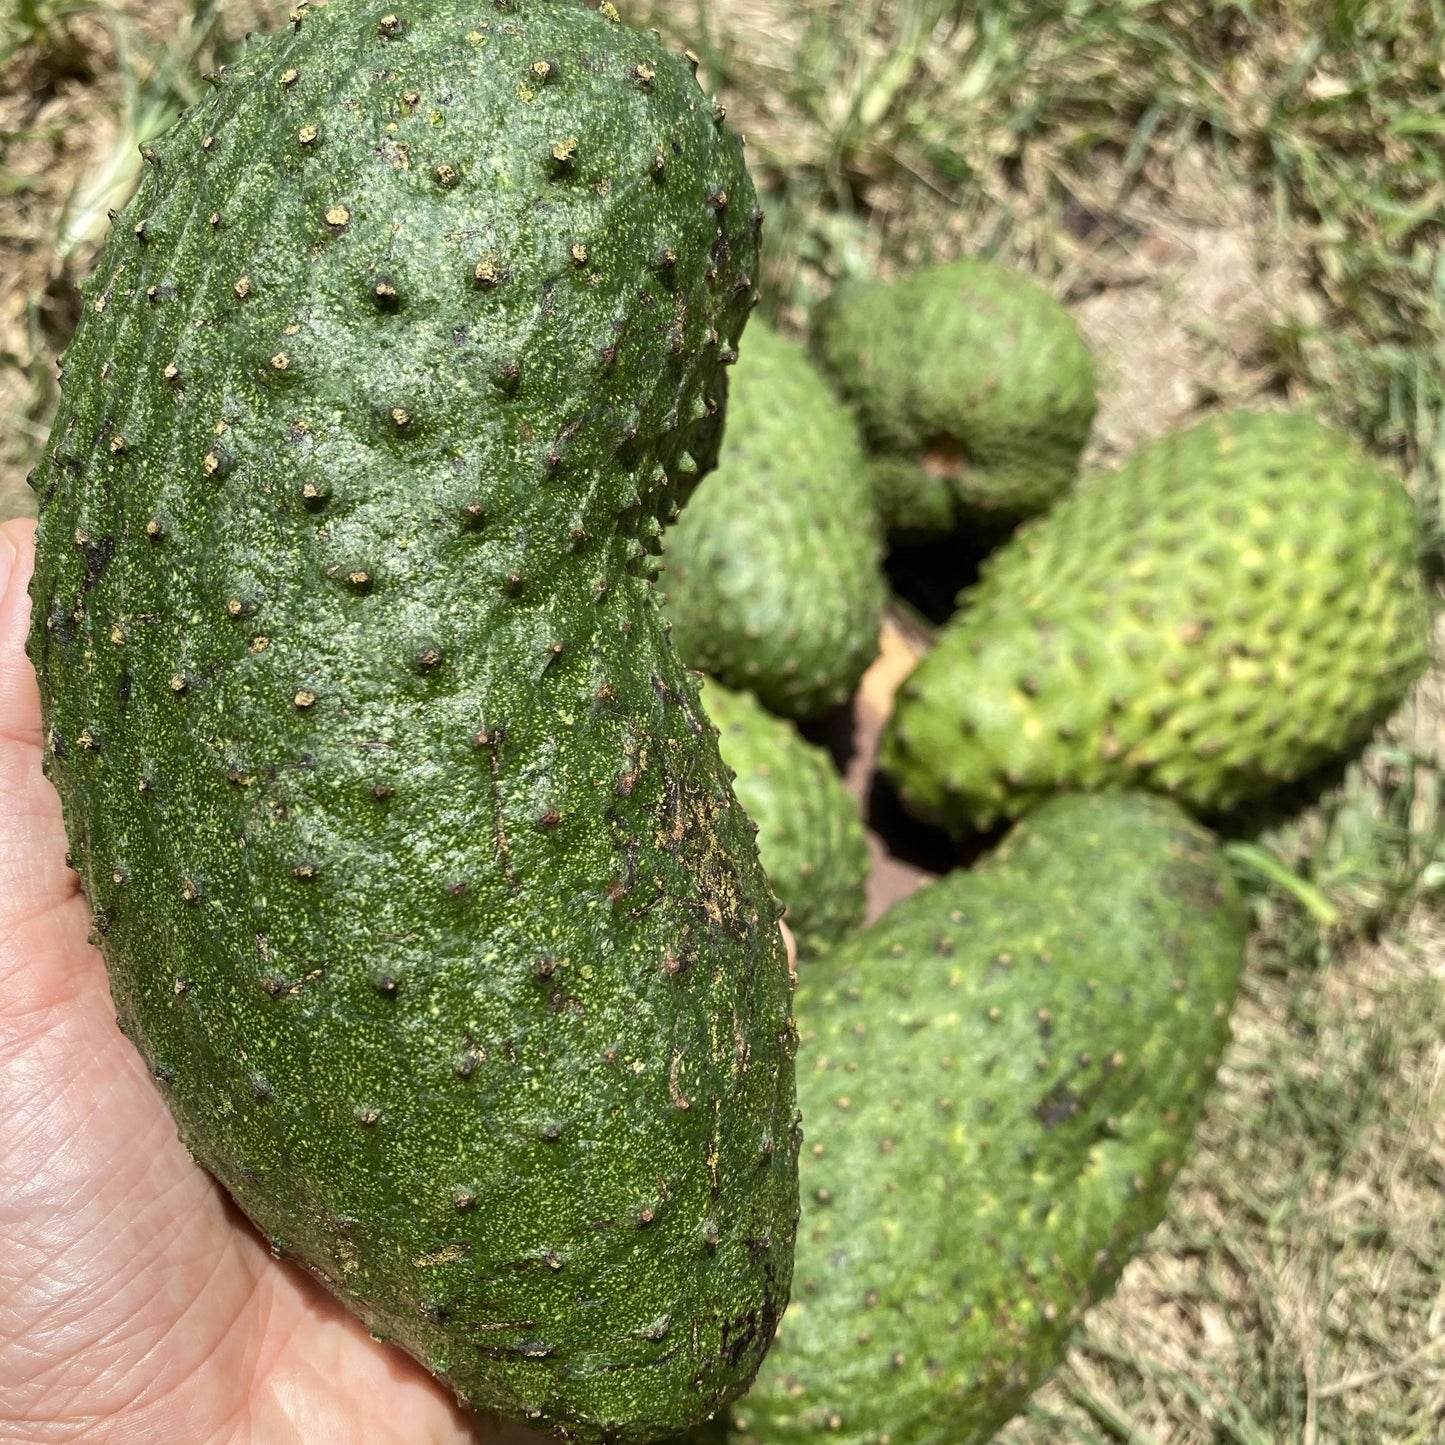 (Guanabana) For Juice 1 Fruit (Special Request) - $77